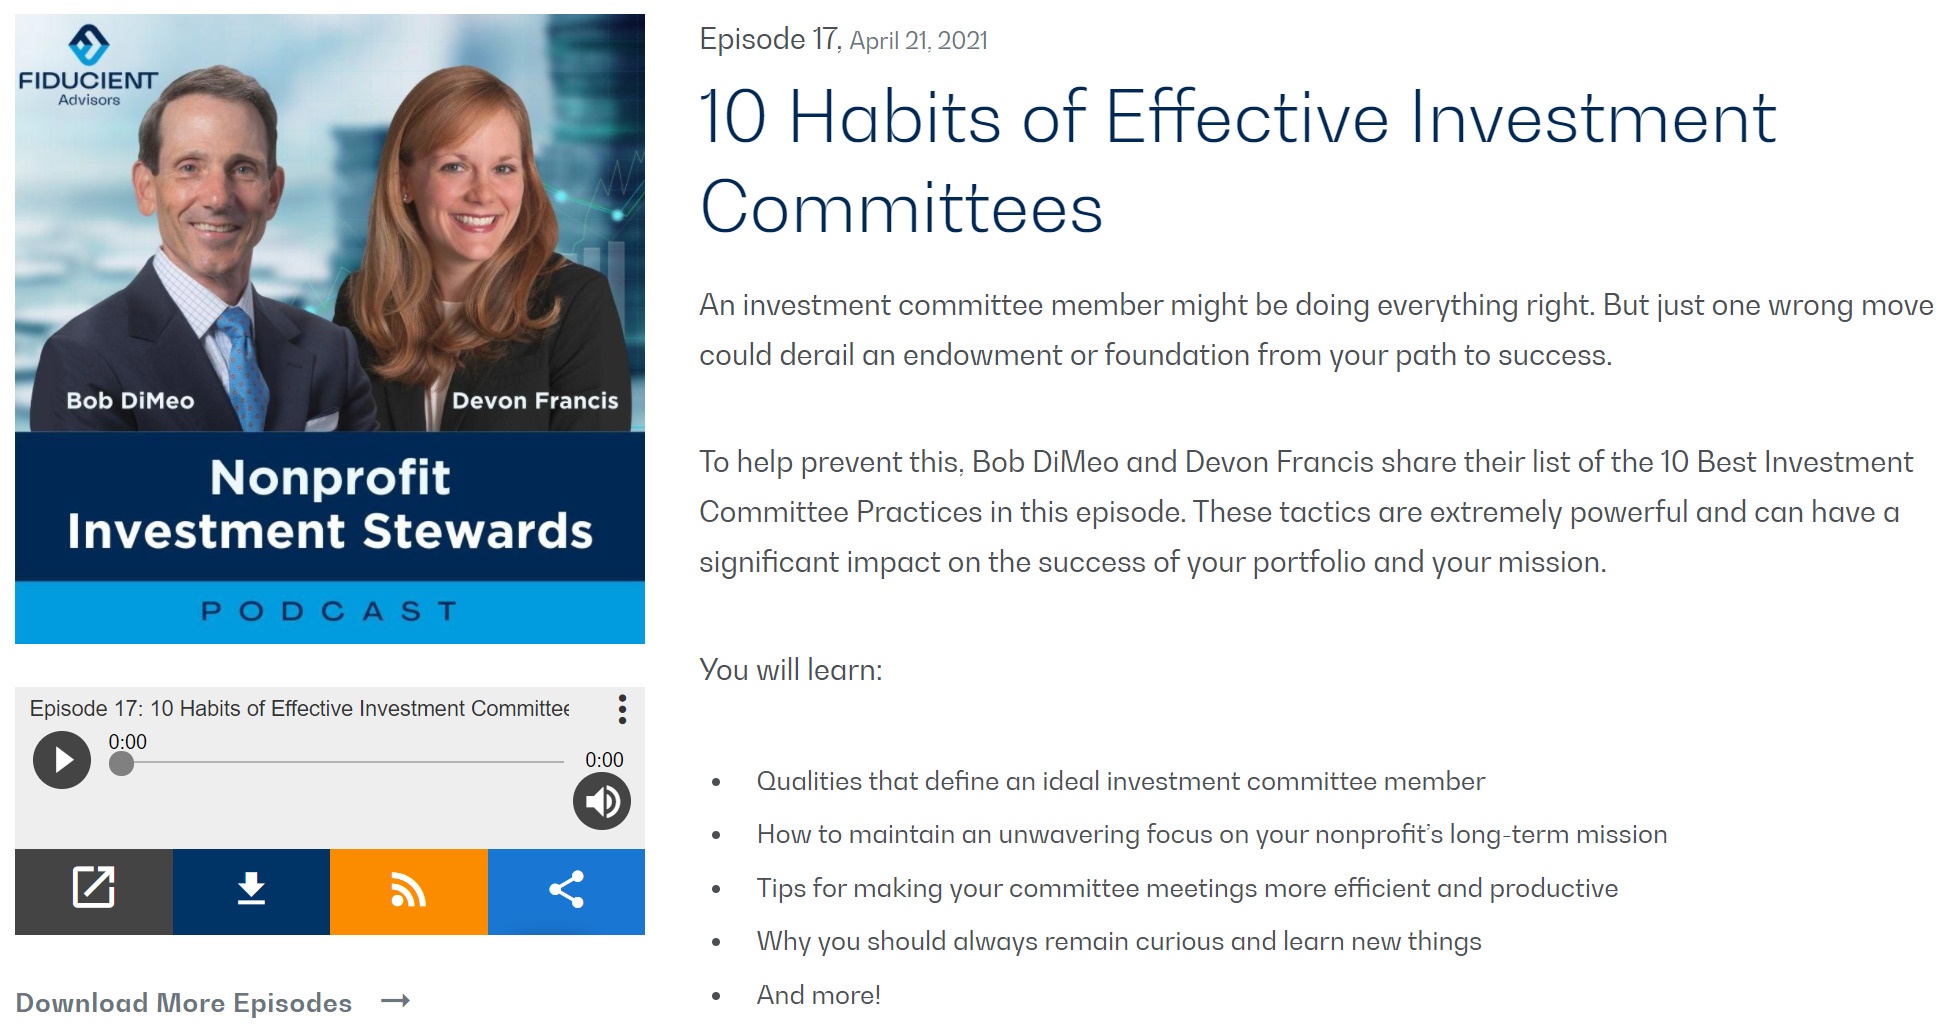 10 Habits of Effective Investment Committees